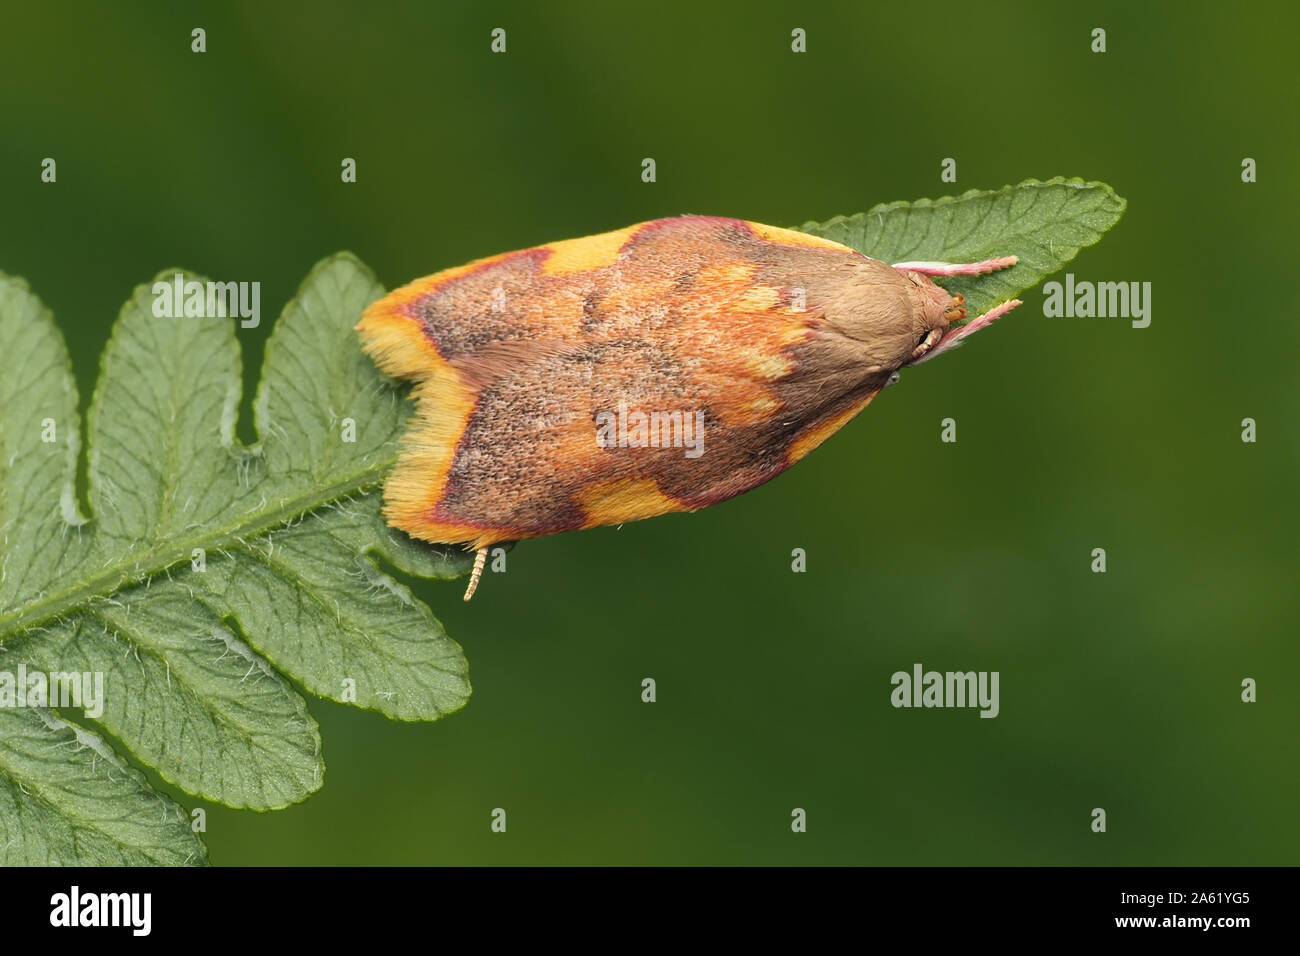 Carcina quercana moth perched on underside of fern. Tipperary, Ireland Stock Photo